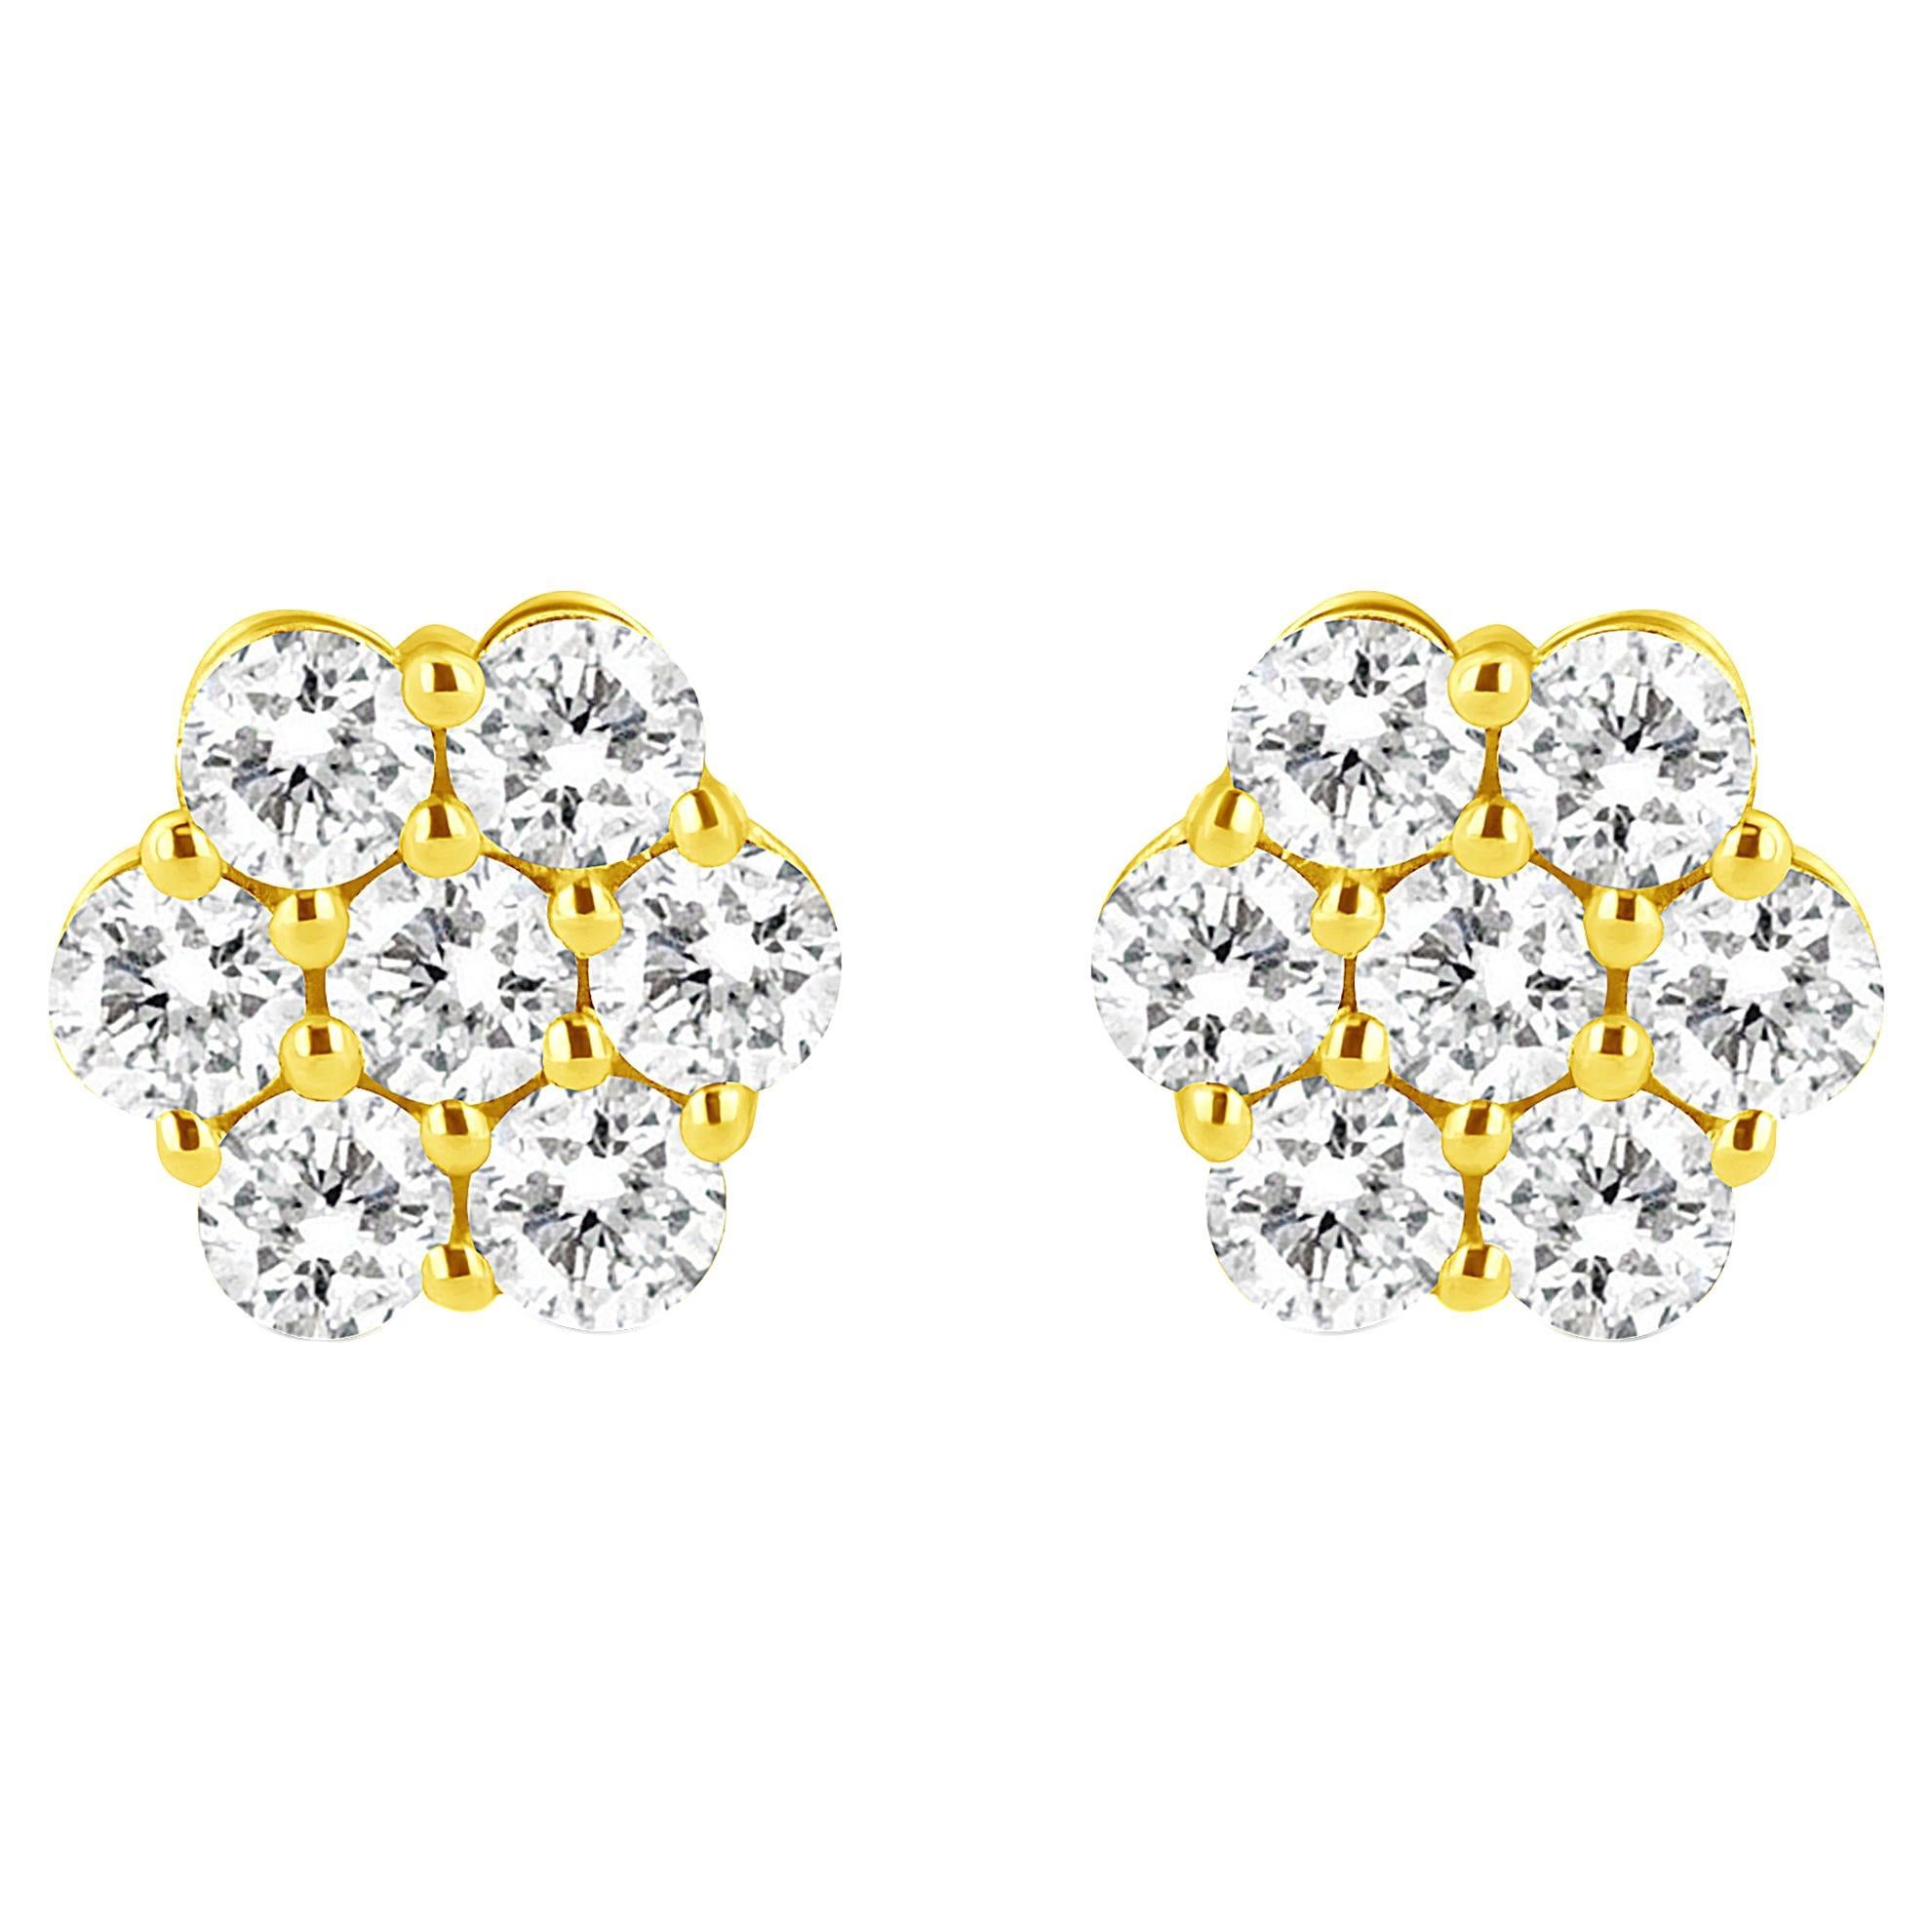 14K Yellow Gold 1/2 Carat Round Cut Diamond Floral Cluster Stud Earrings